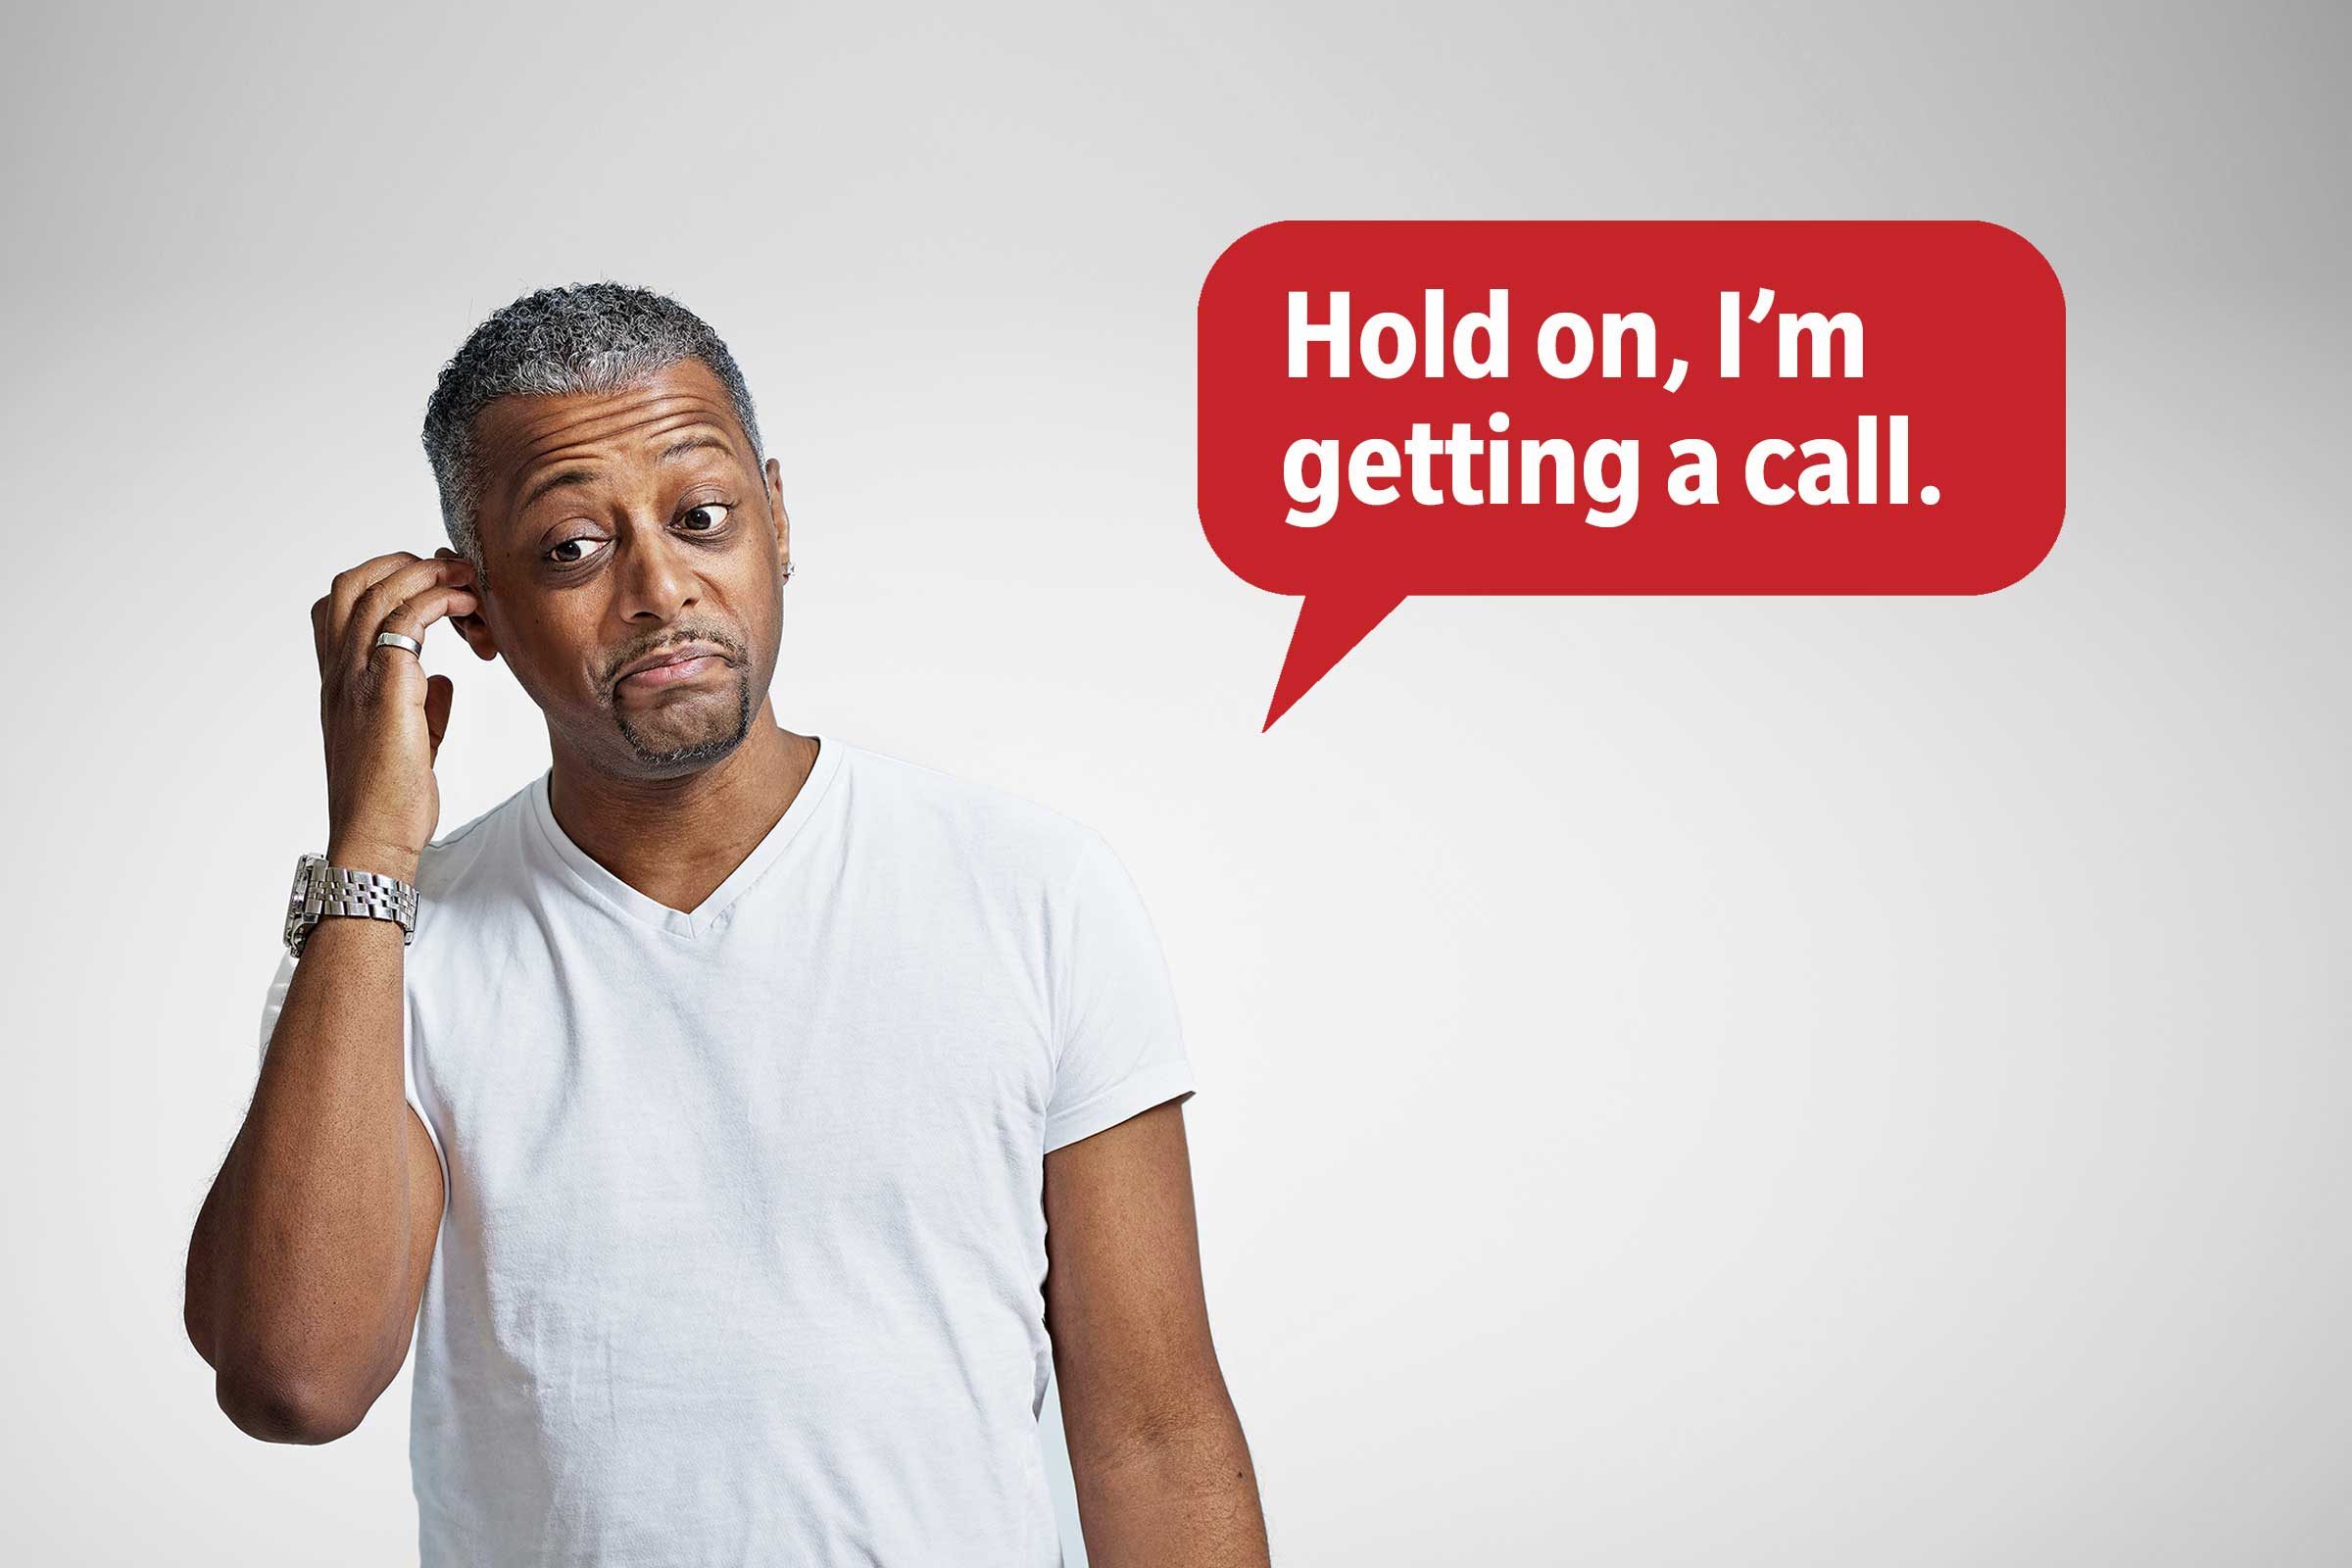 Man miming a phone call delivering a comeback roast, speech bubble text: "Hold on, I'm getting a call."